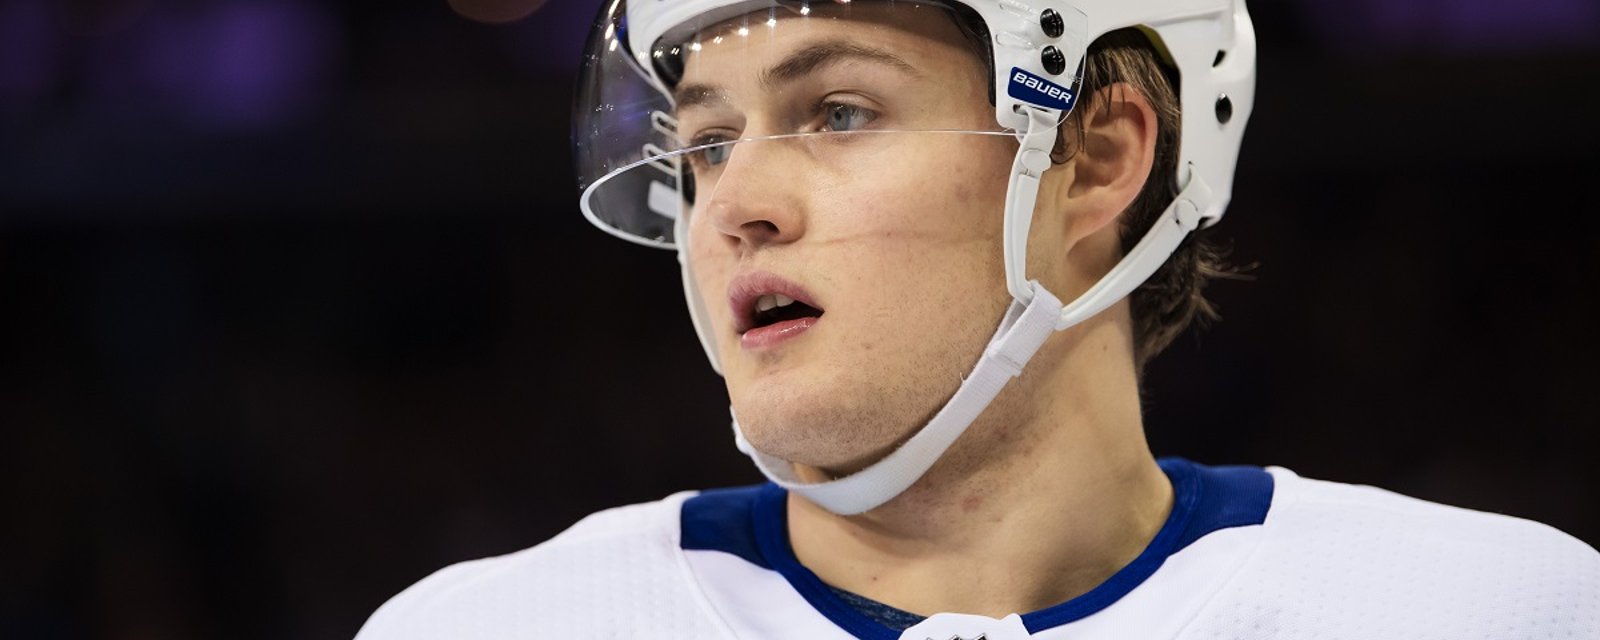 More bad news for the Leafs on the Nylander front after meeting in Switzerland.